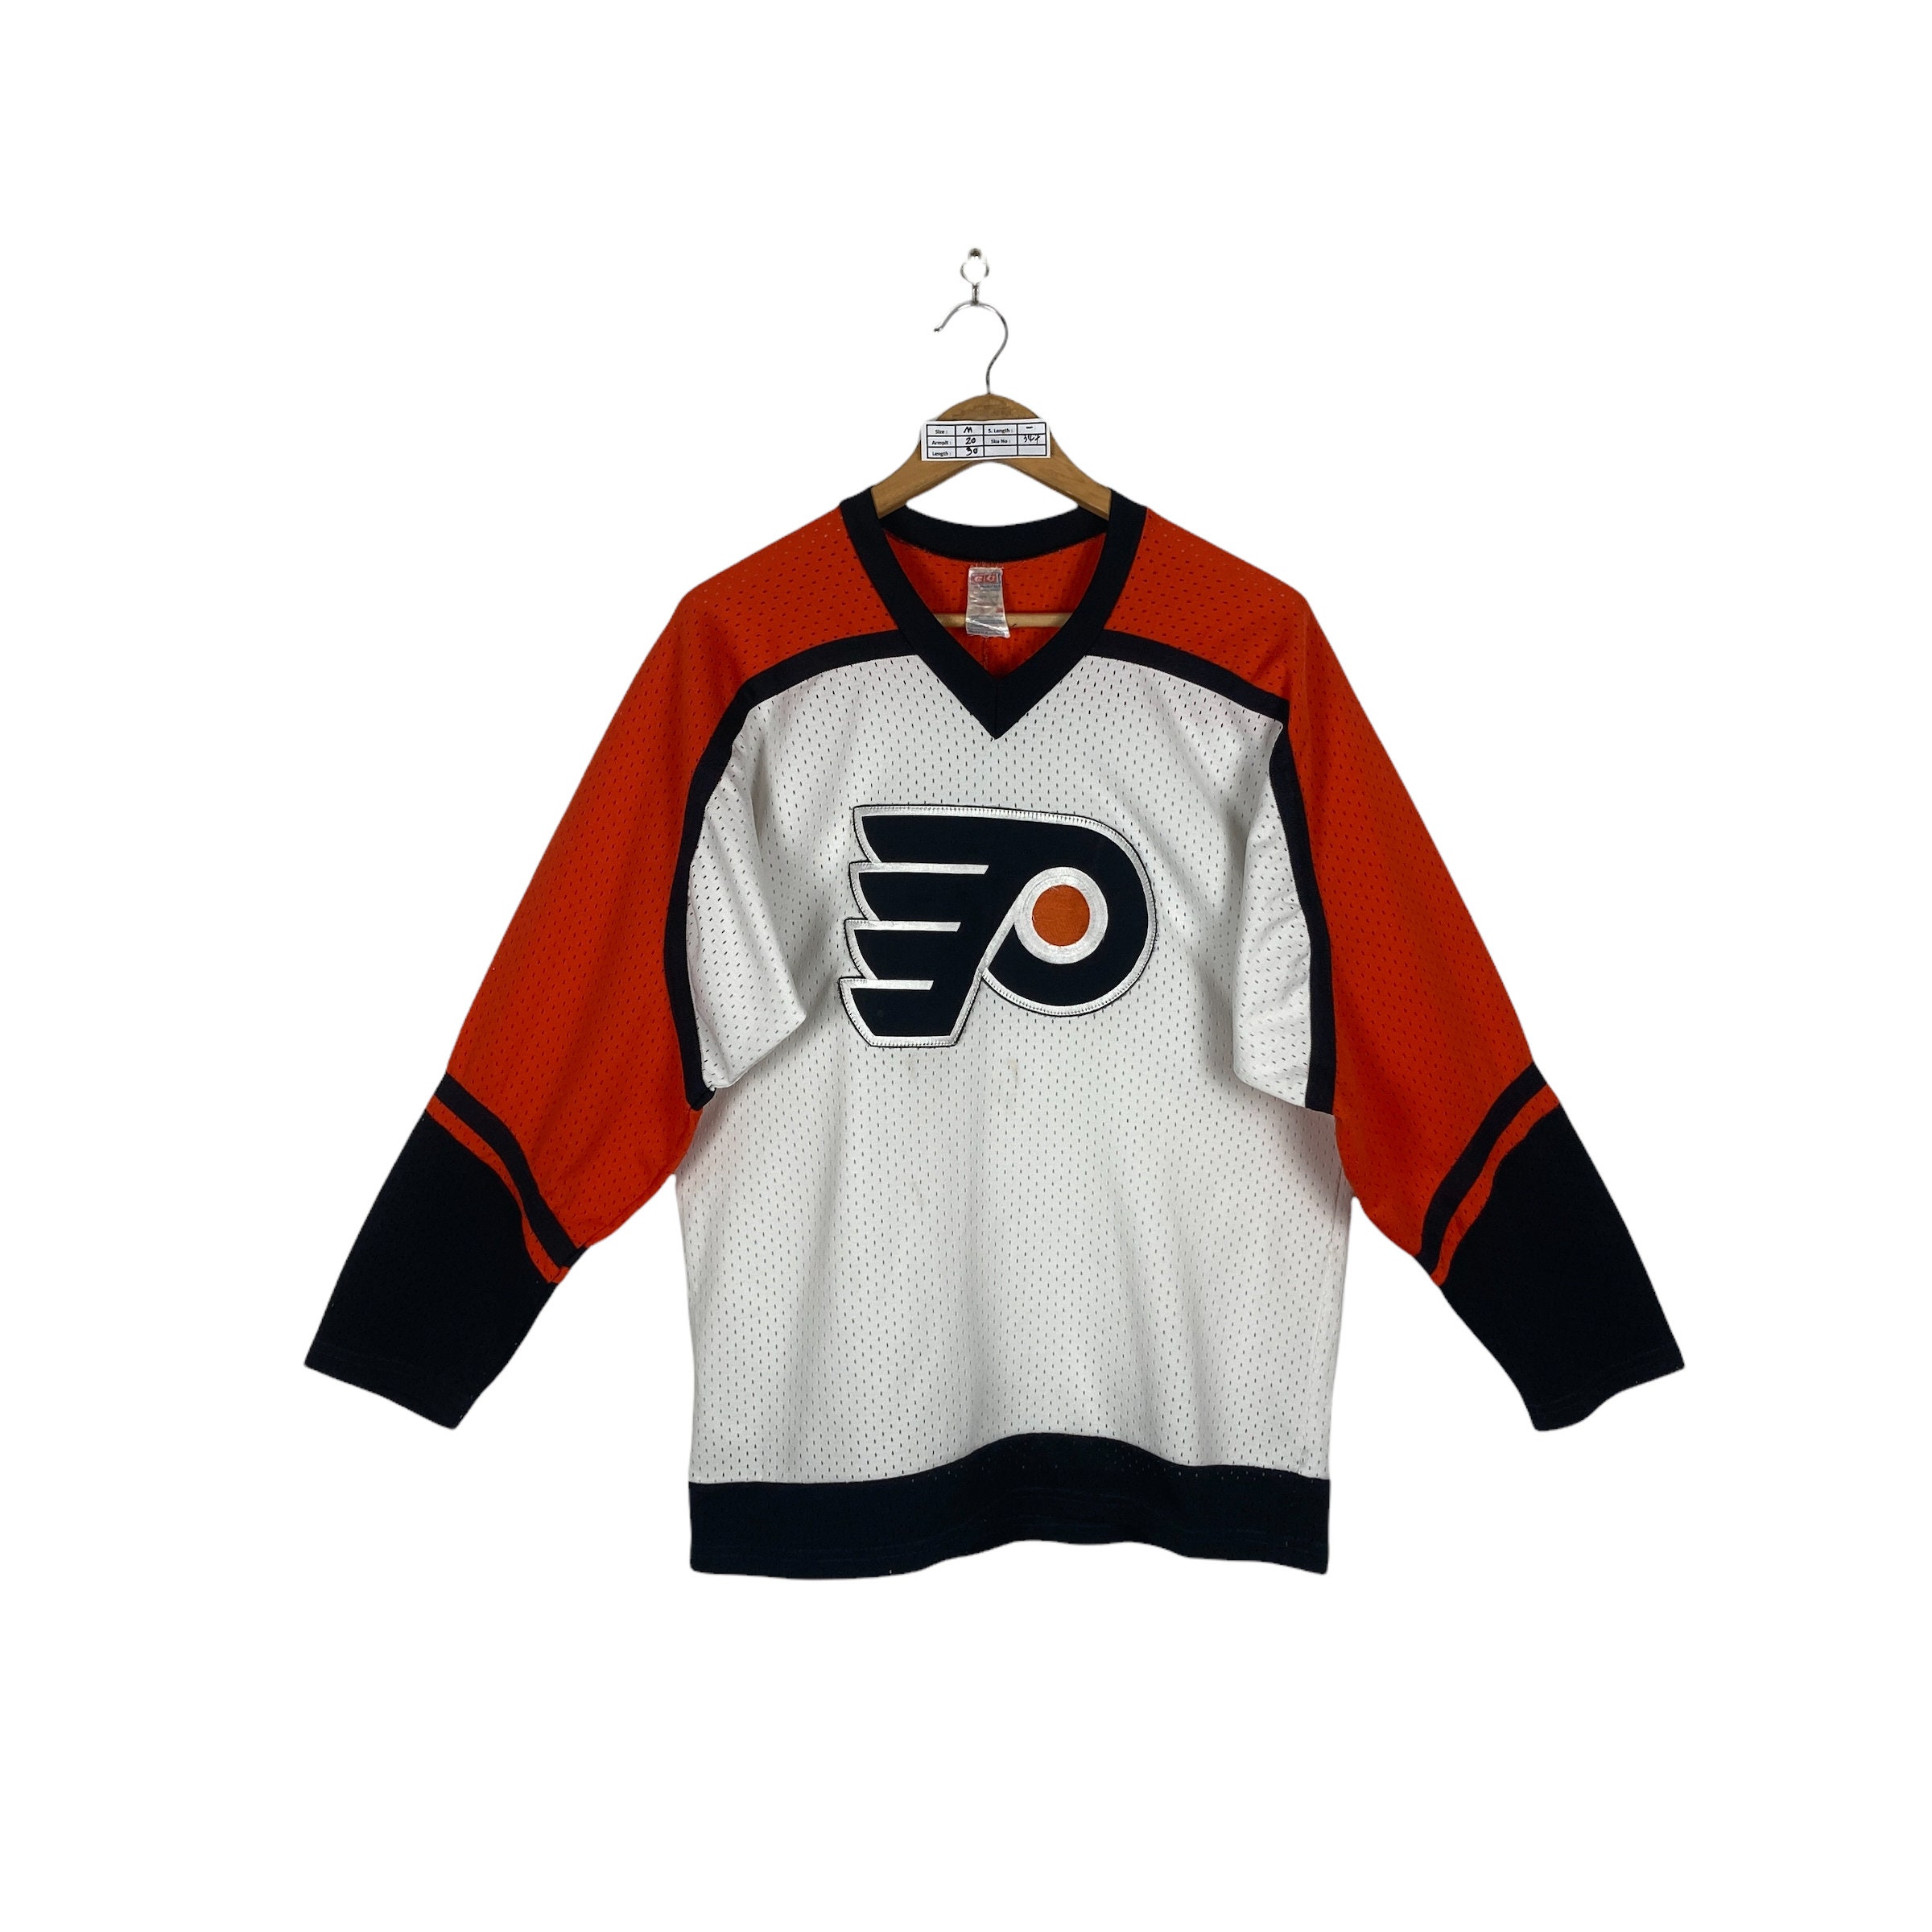 Is This The Stadium Series Jersey The Flyers Will Release Tomorrow? -  Crossing Broad